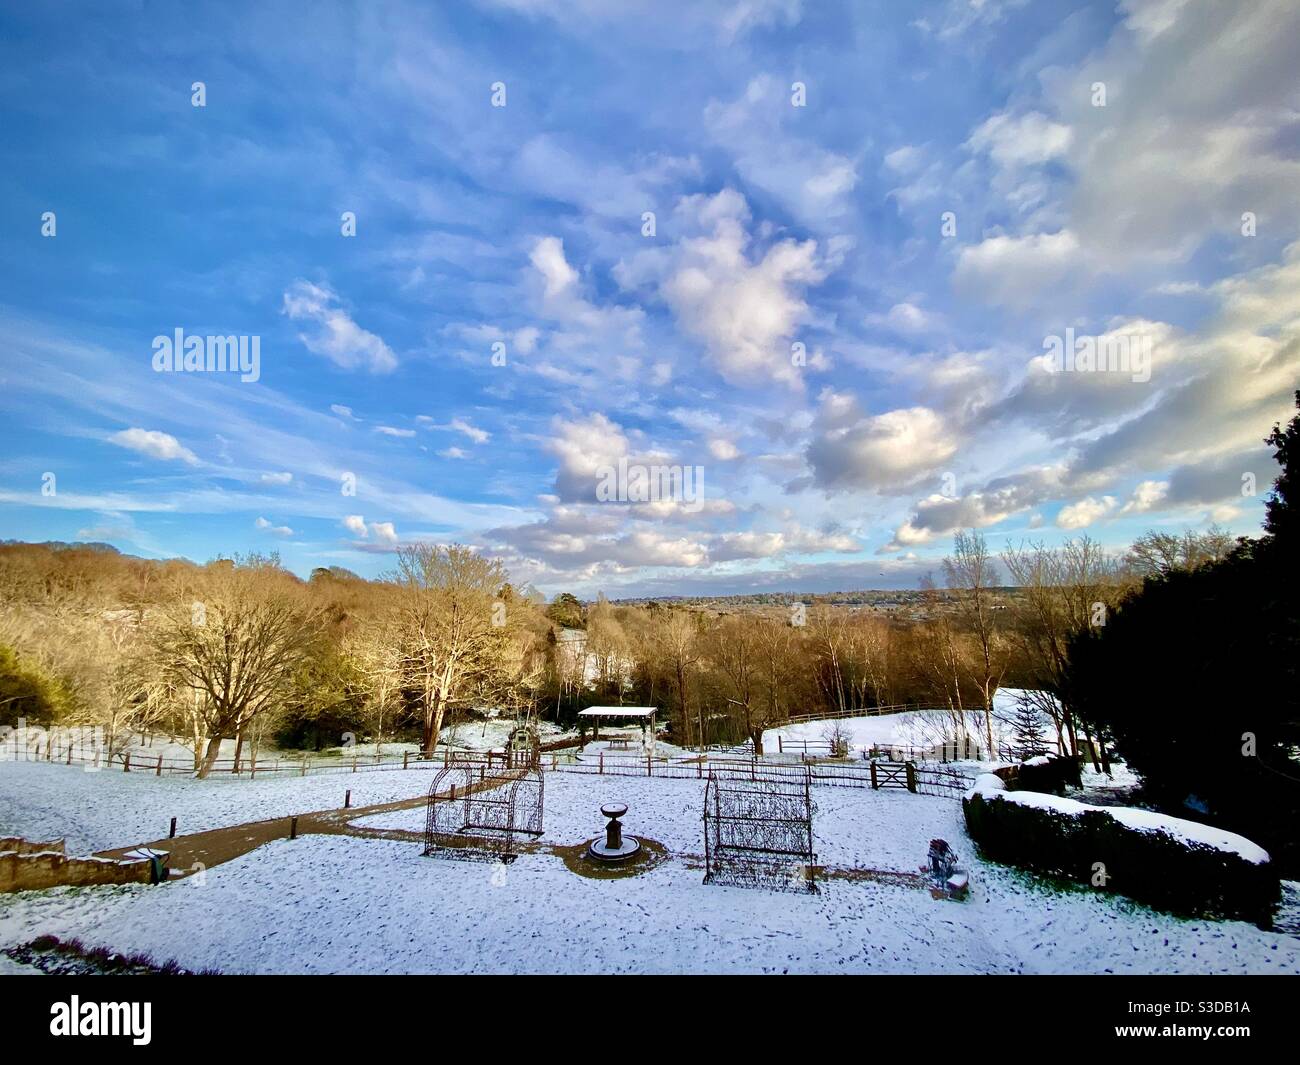 Picturesque view of old woodland and picturesque winter scene with snow from The Beacon near Tunbridge Wells in Kent UK Stock Photo